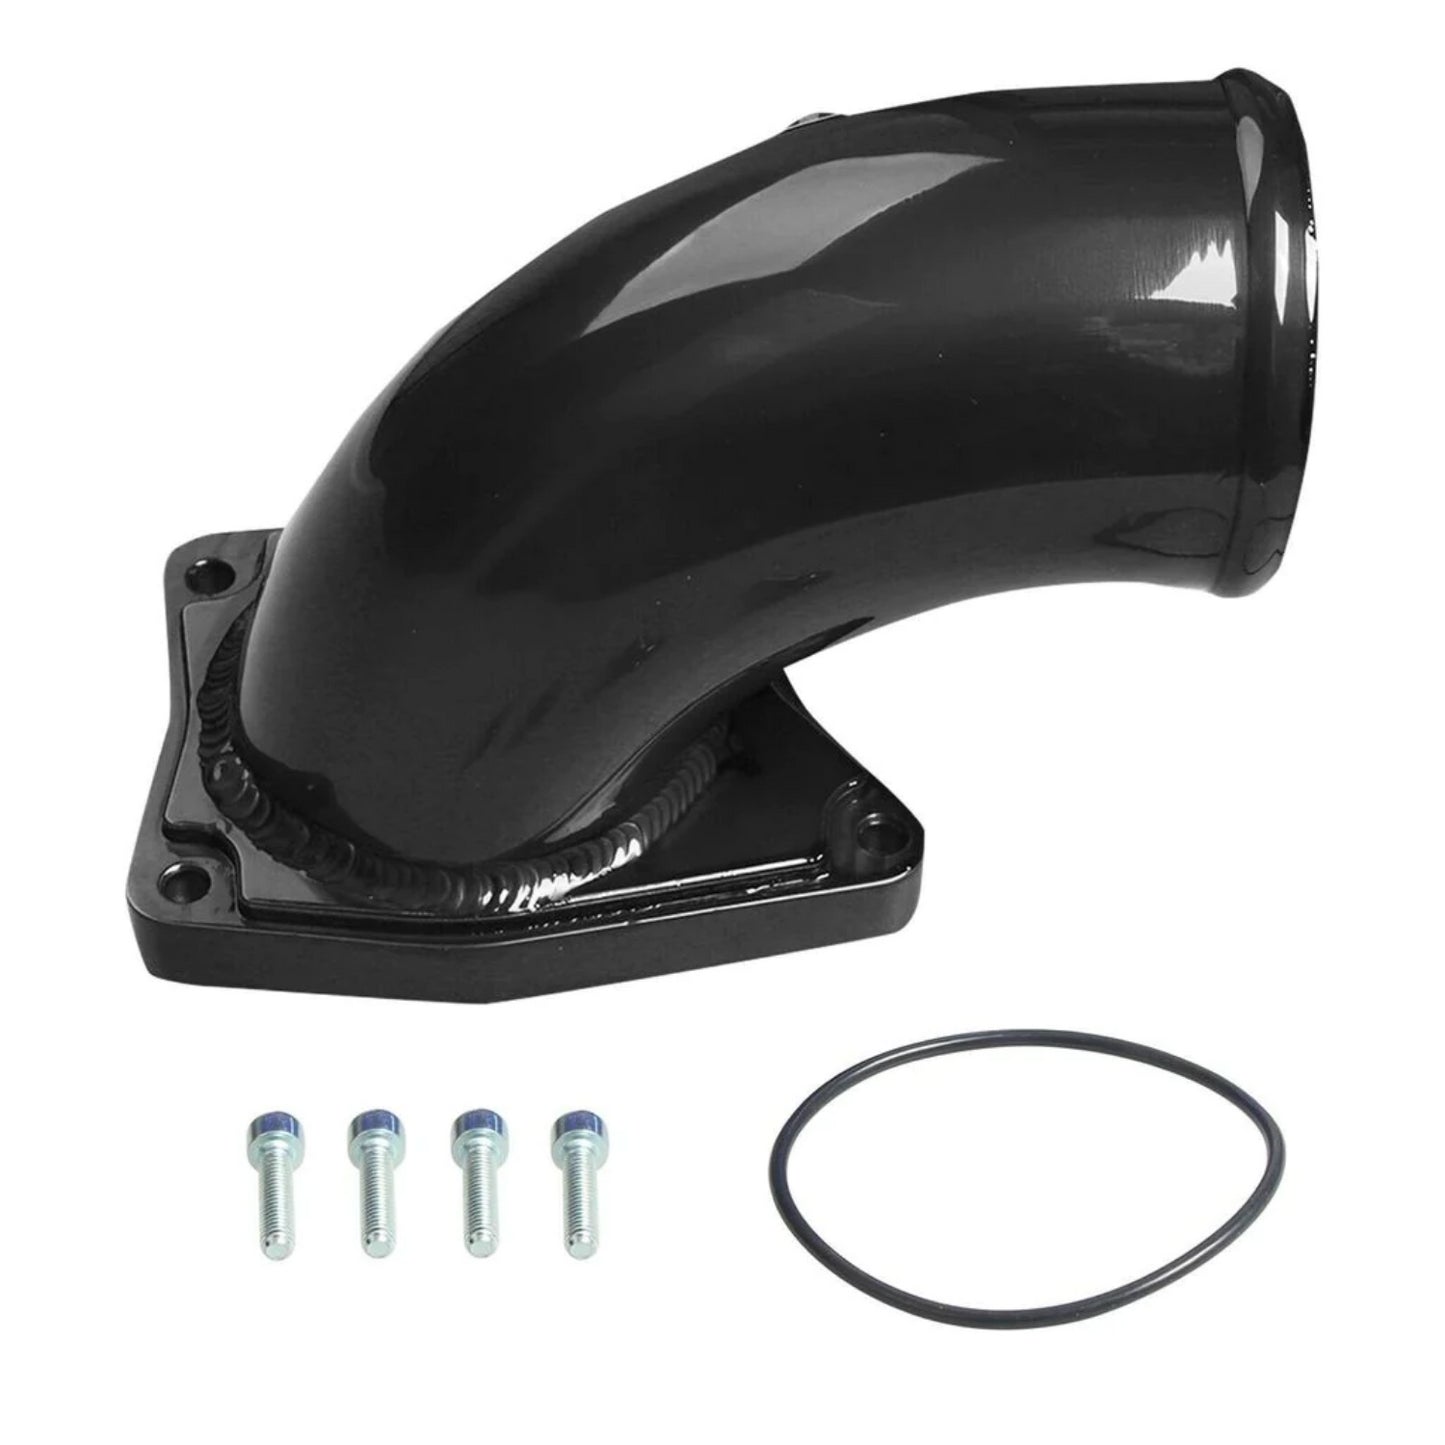 EGR Bypass Delete Kit & Intake Elbow for 2003 - 2007 Ford F250 F350 F450 F550 6.0L Powerstroke Diesel